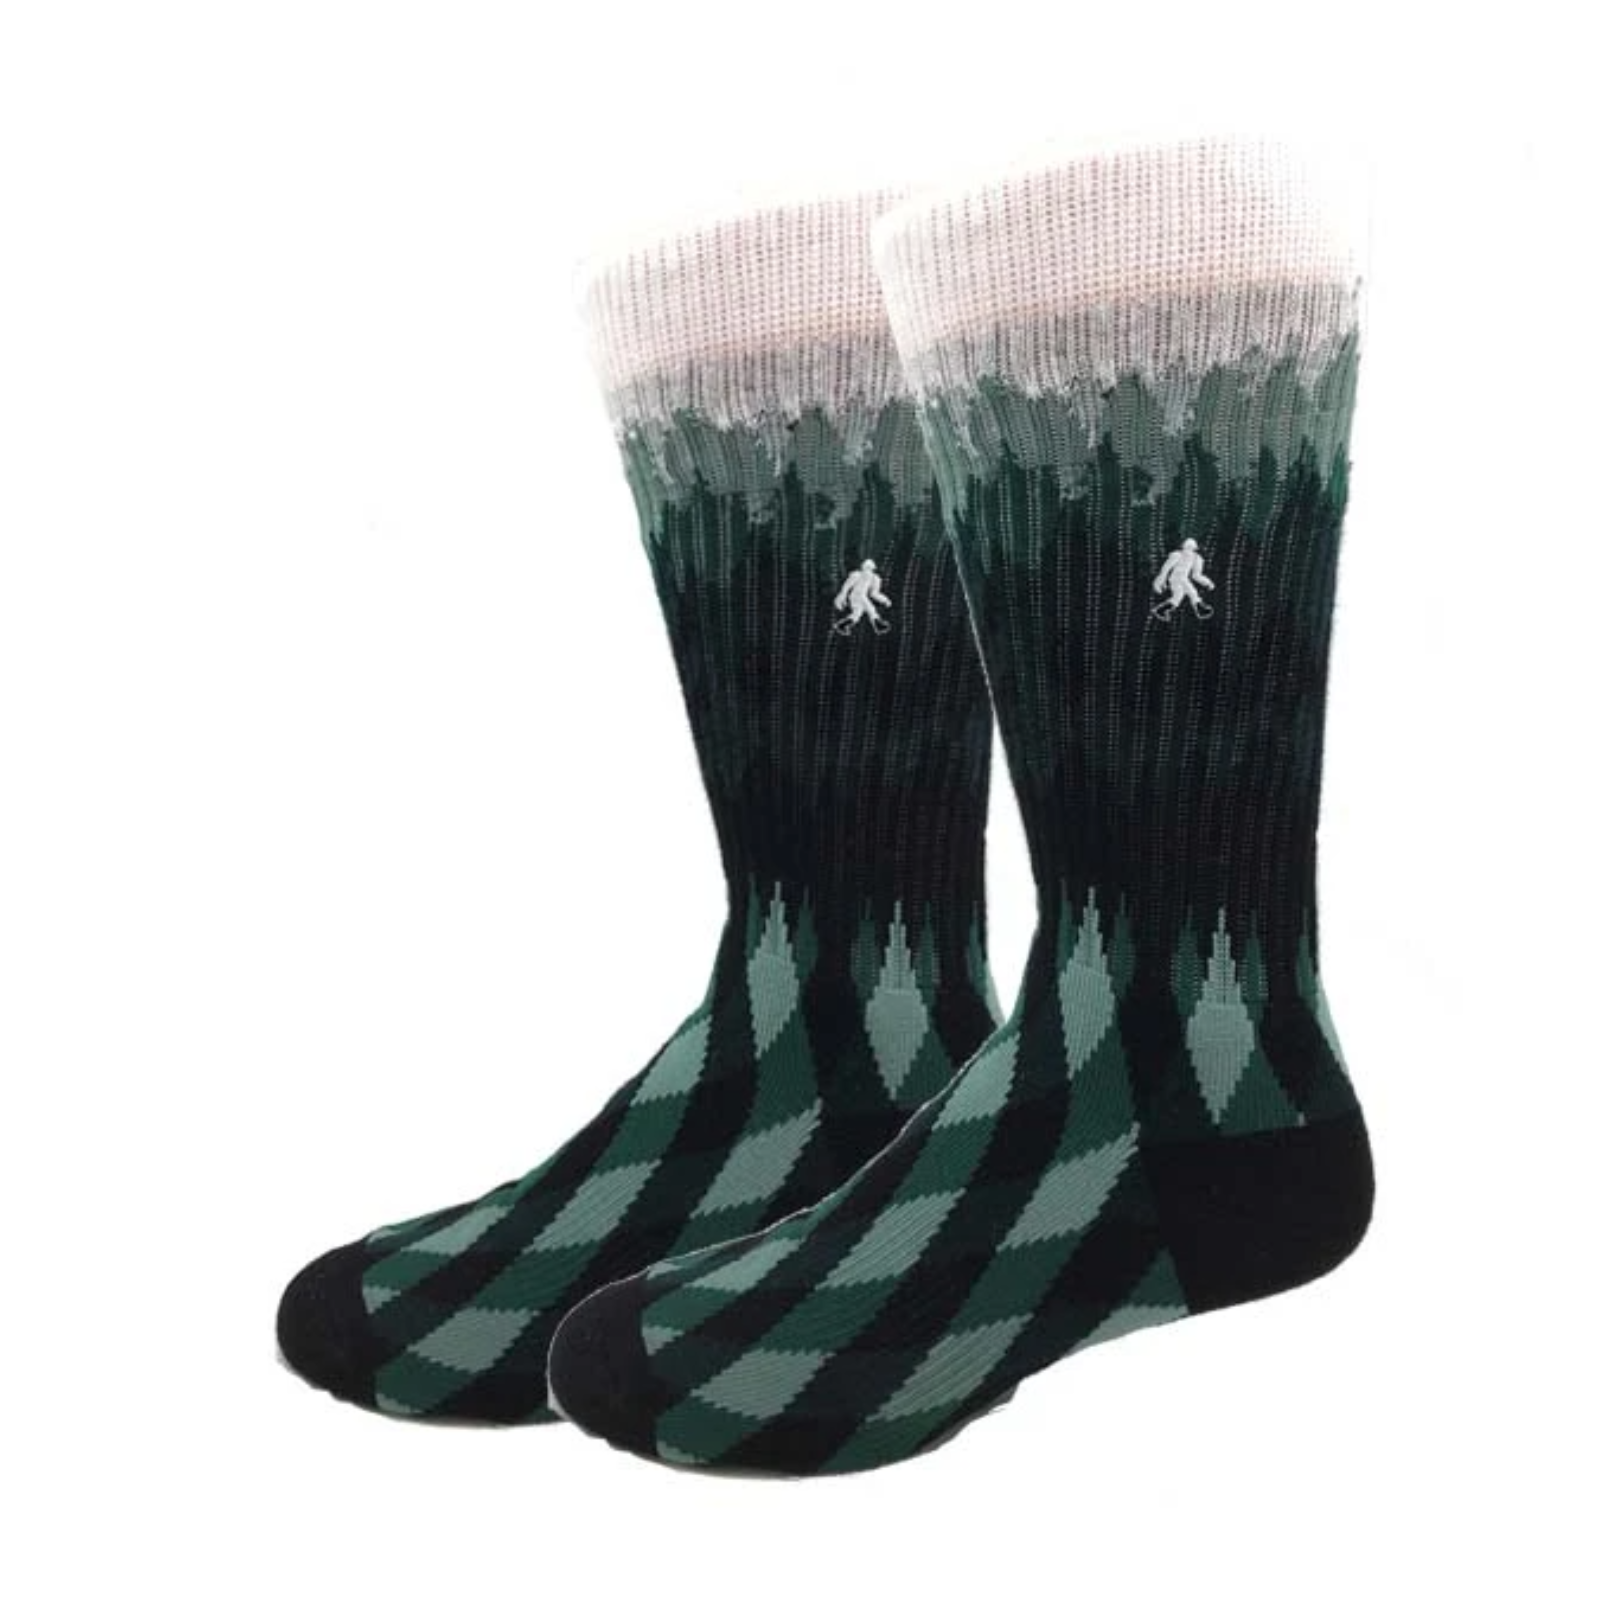 Sock Harbor Forest Active men's crew sock featuring green ombre forest shown on display feet